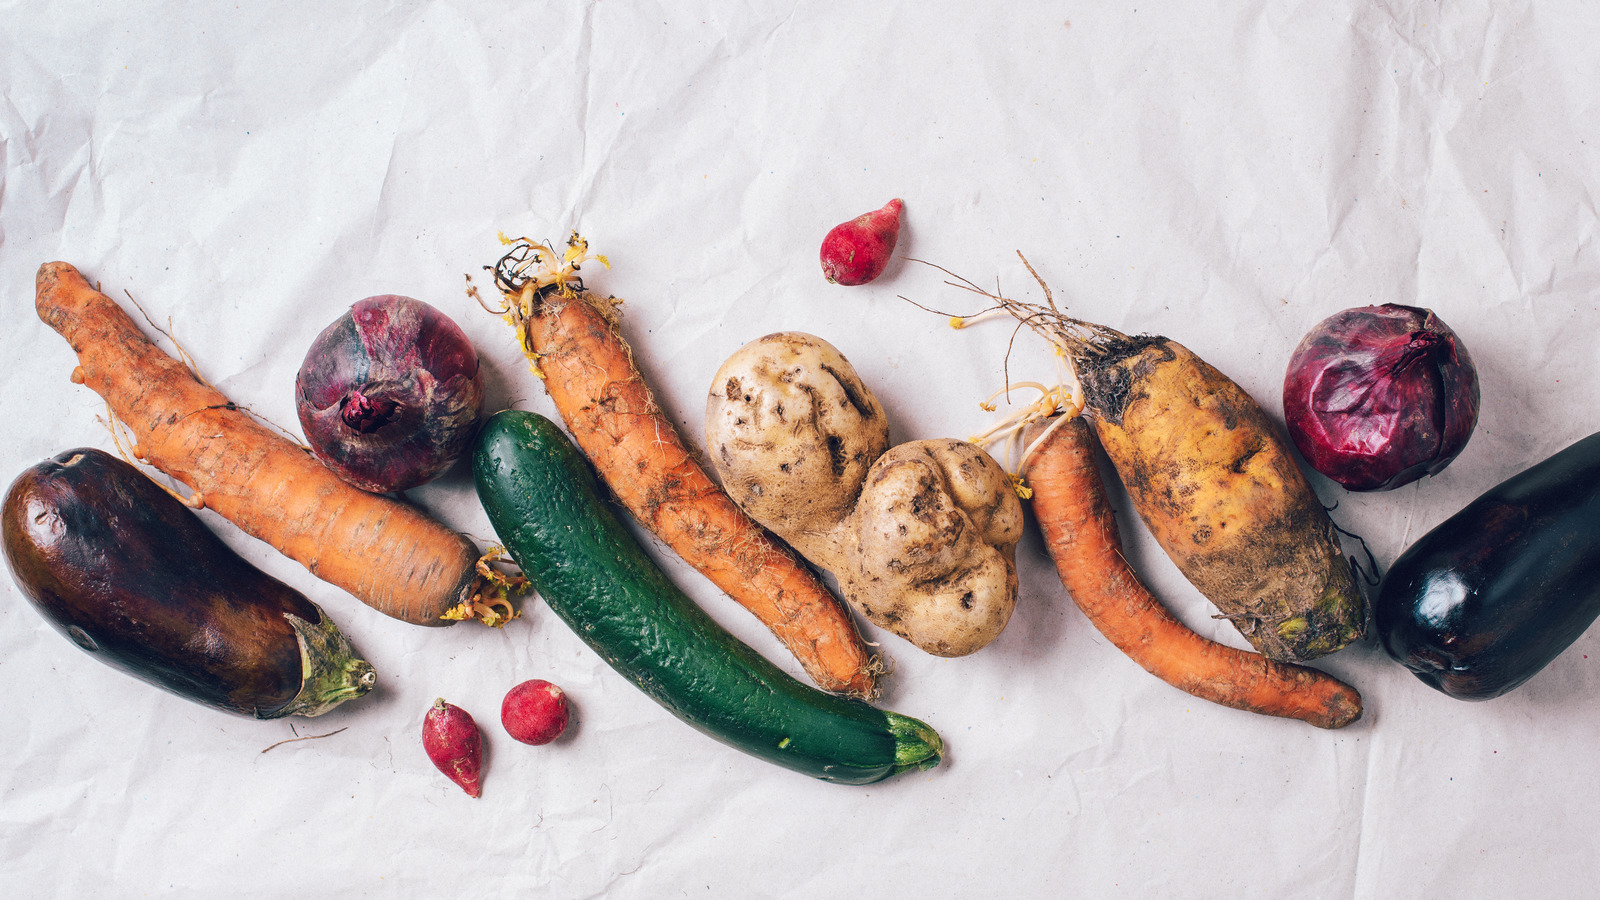 Naturally Imperfect Produce - Learn About The Ugly Produce Movement